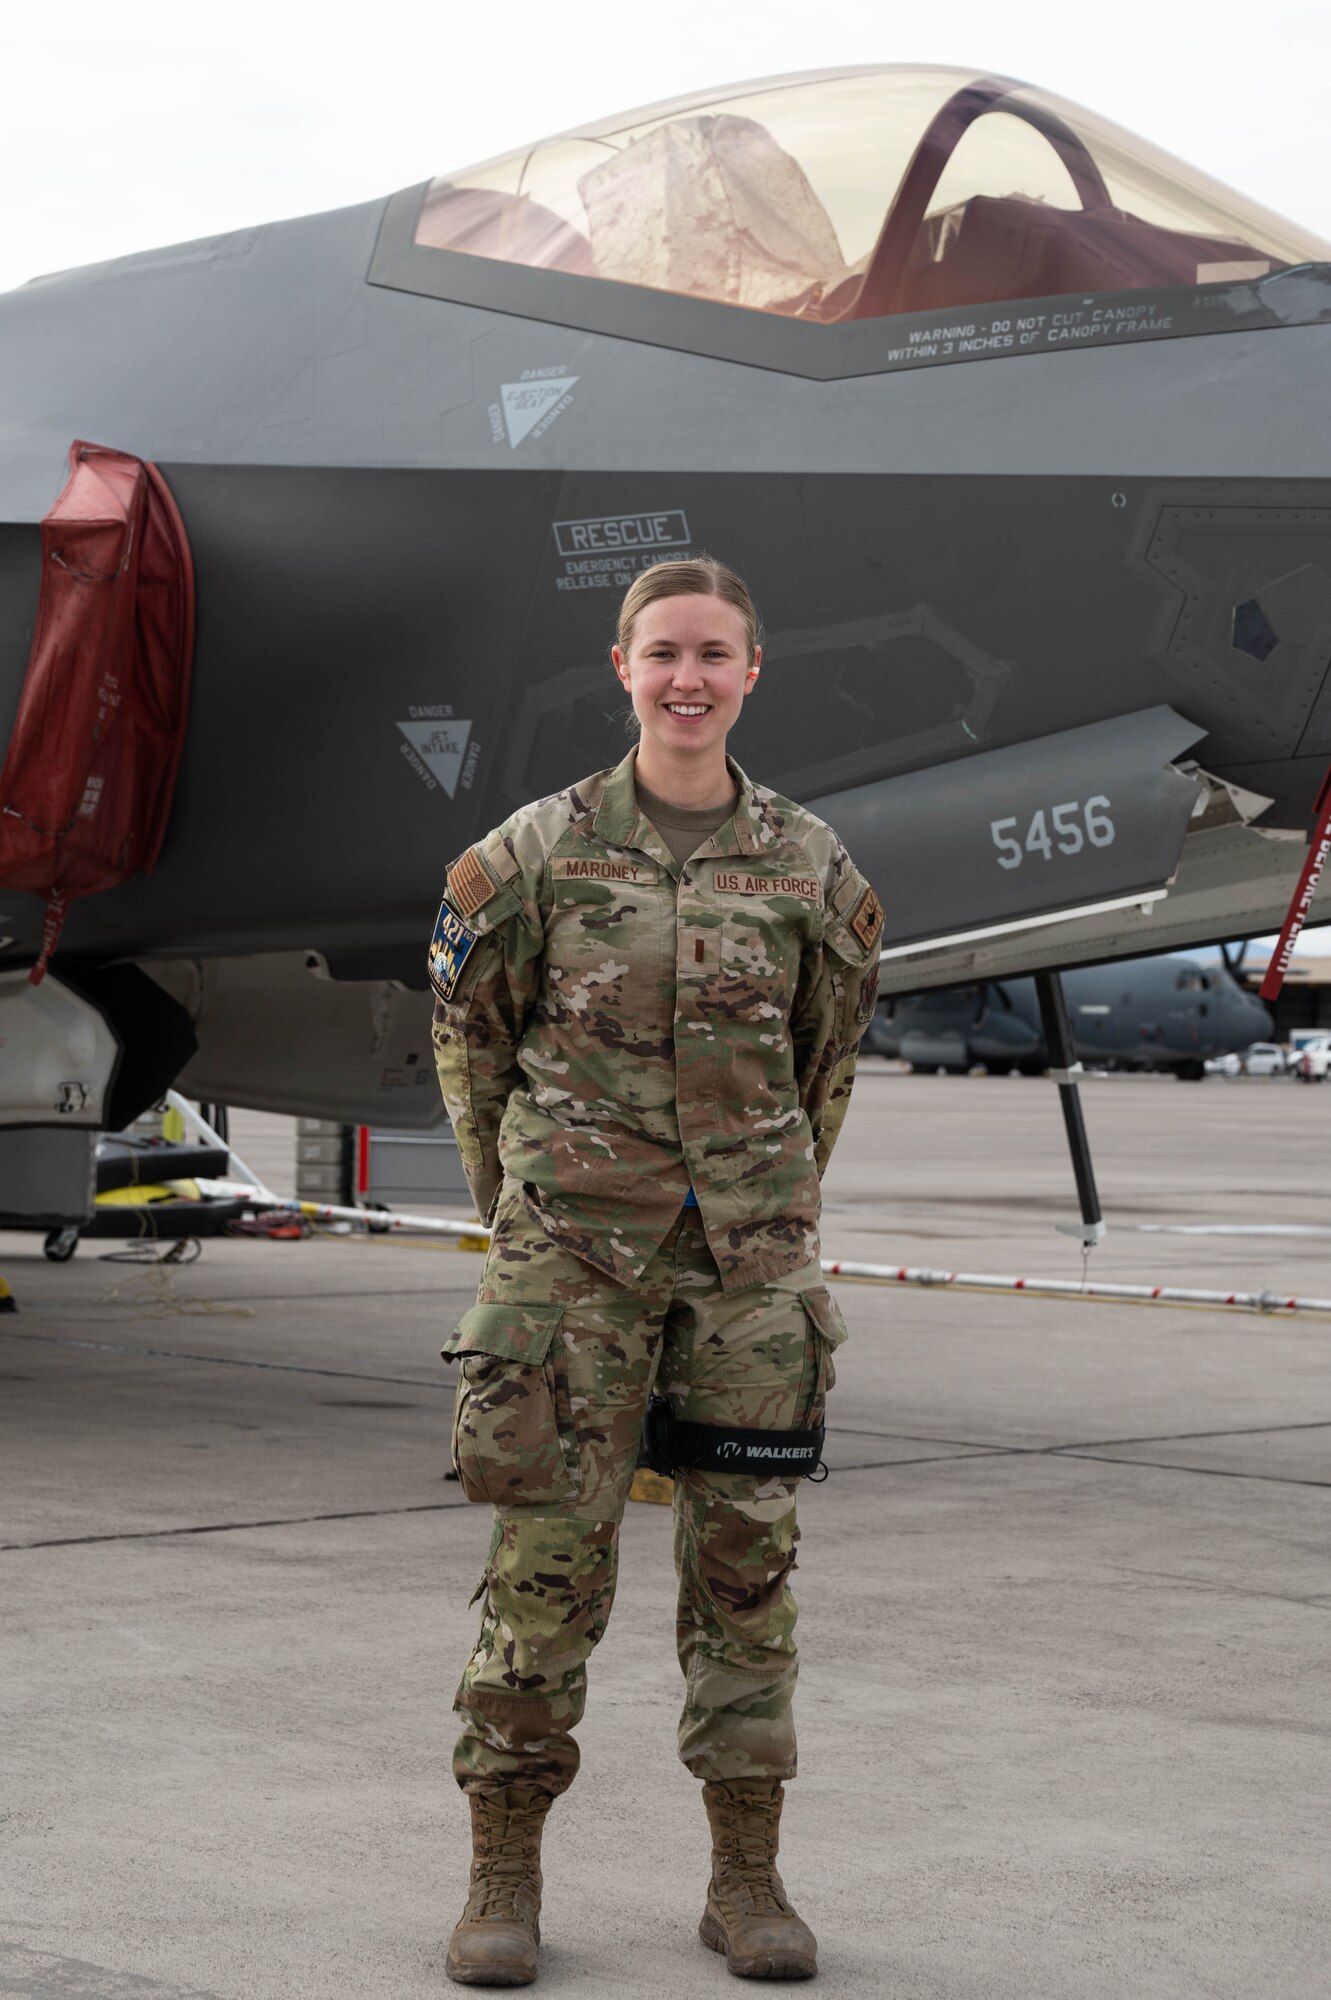 A photo of an F-35 maintainer standing in front of a jet